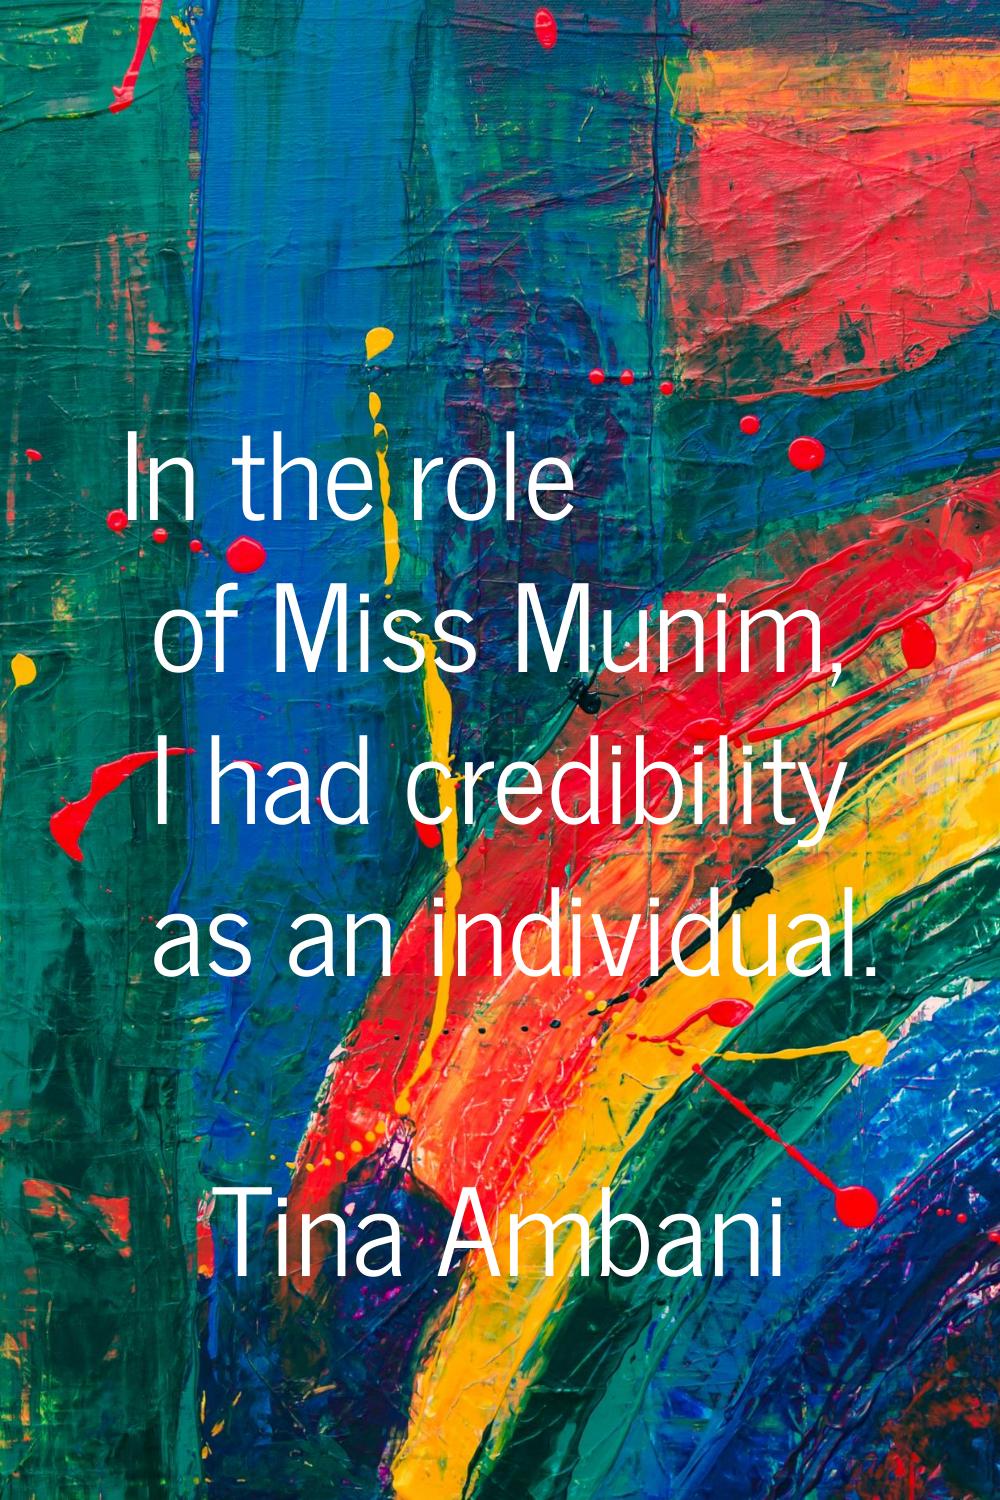 In the role of Miss Munim, I had credibility as an individual.